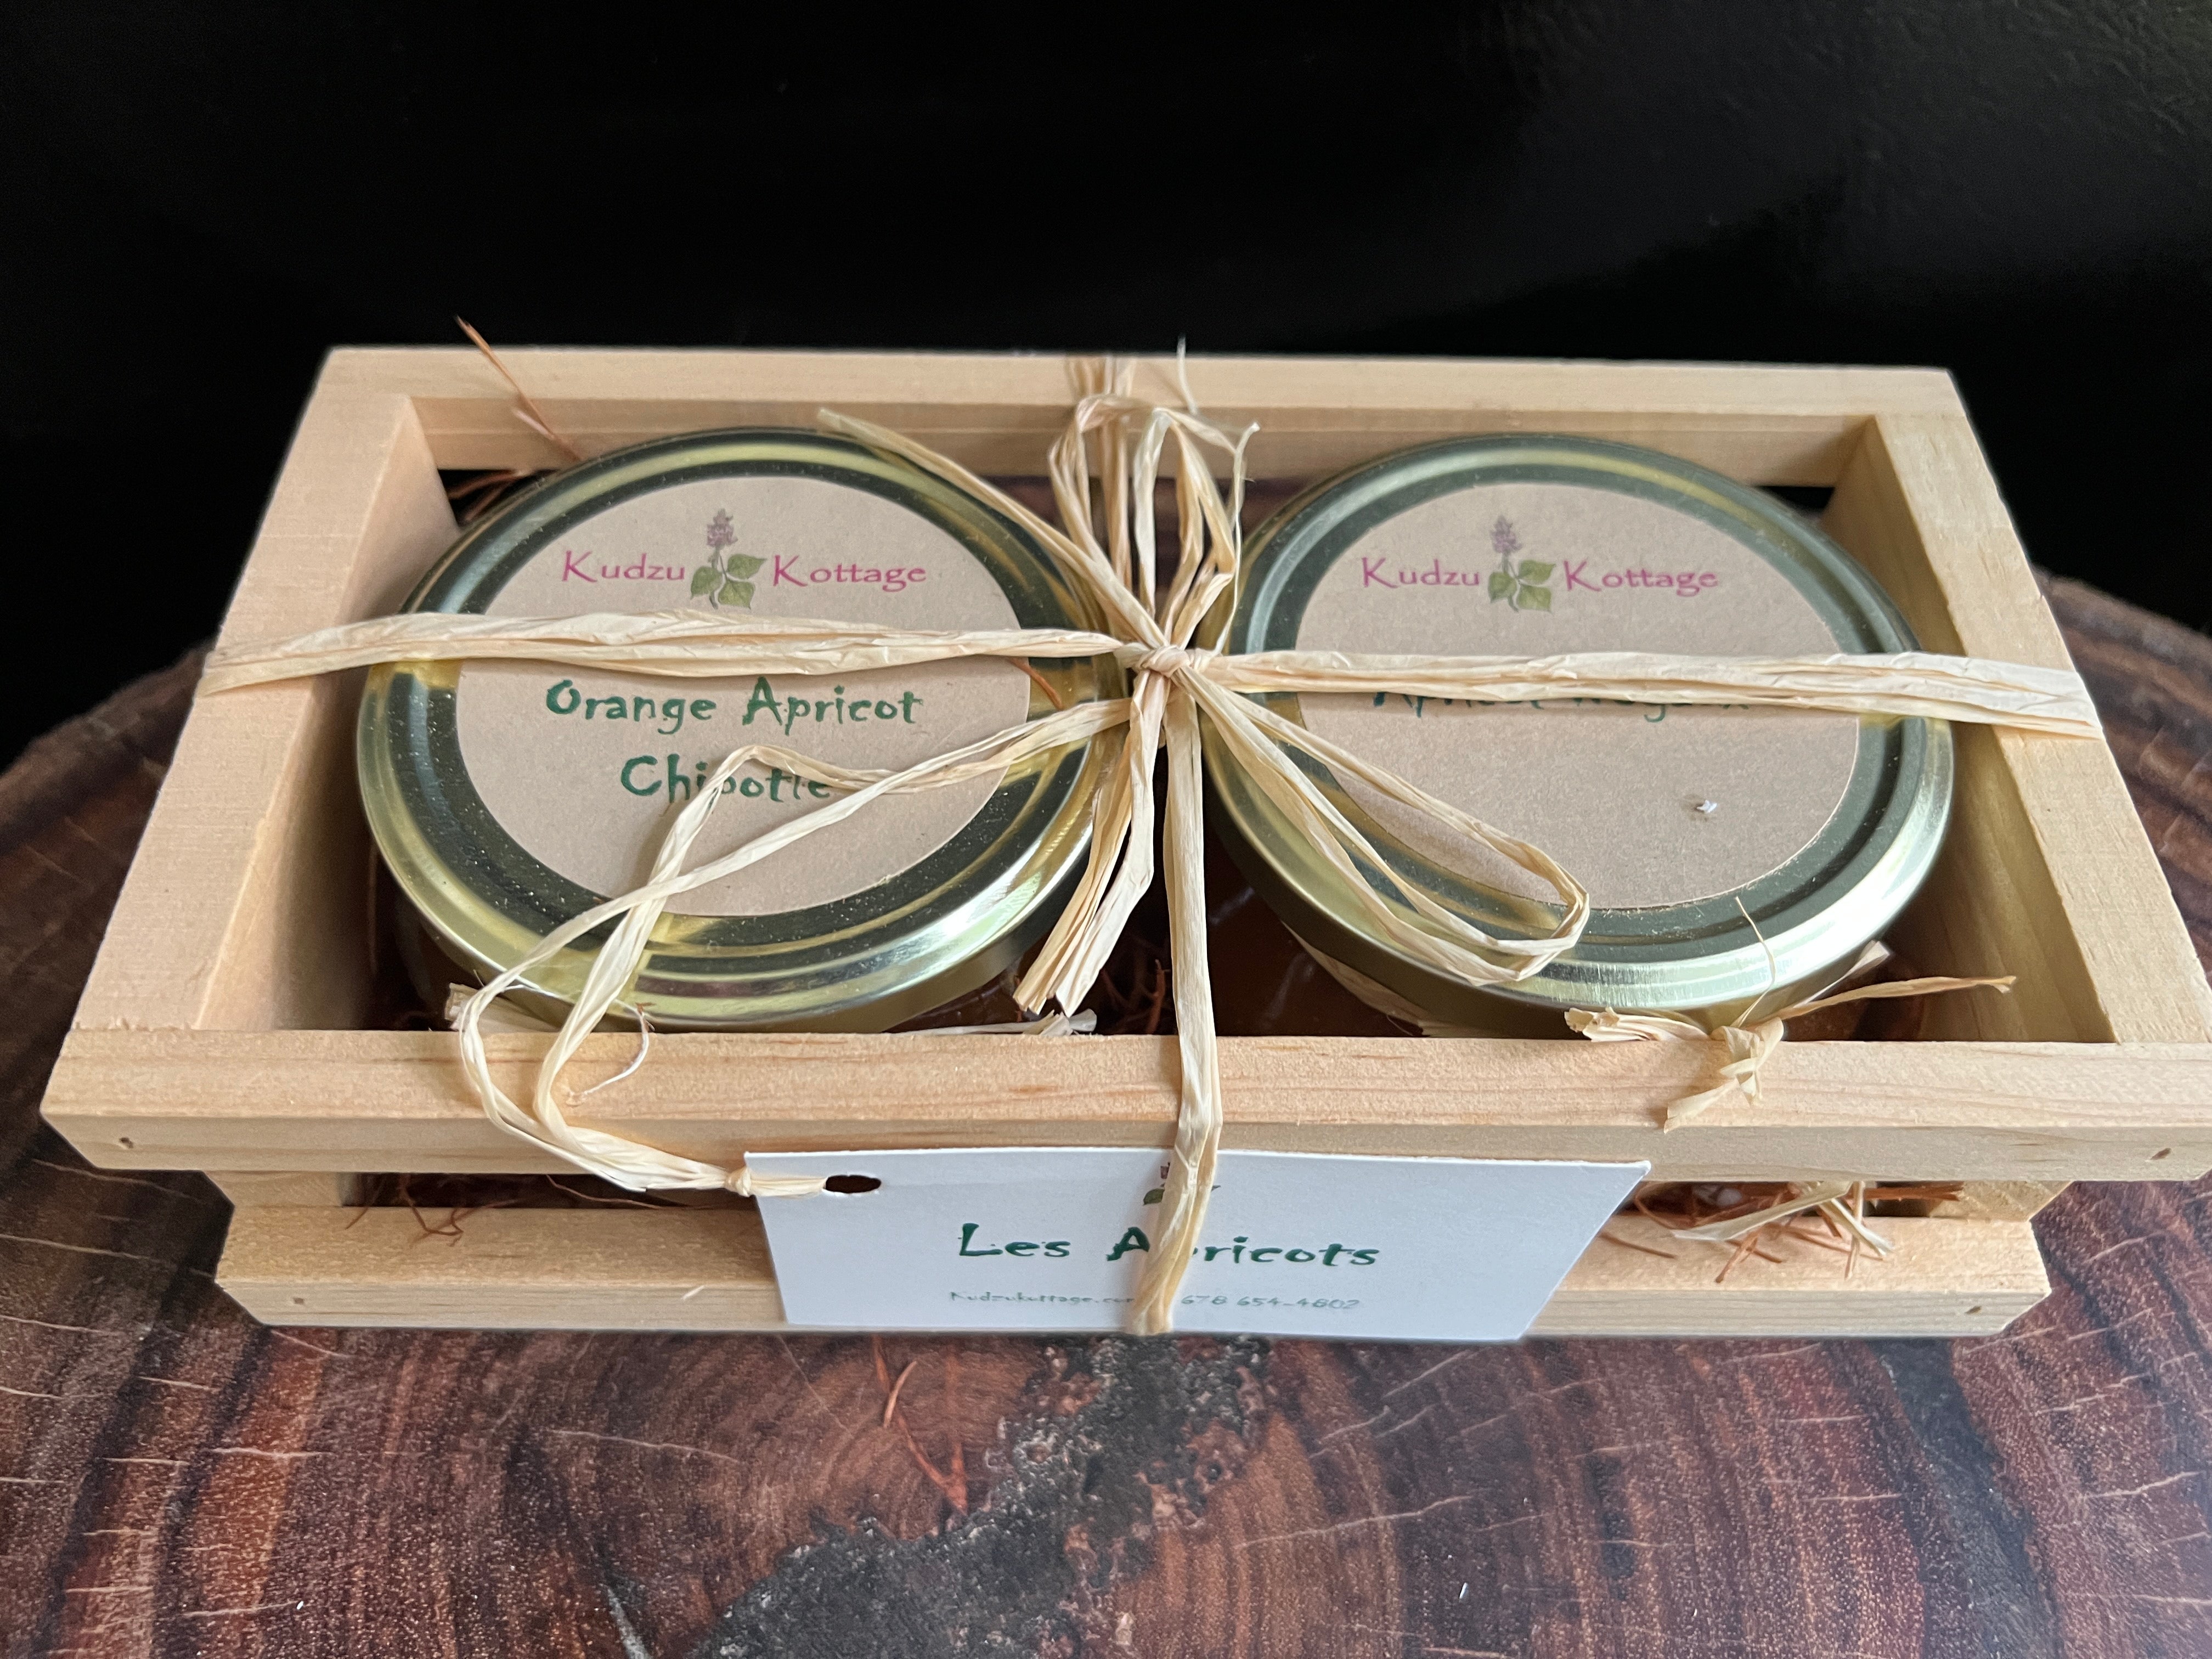 Les Abricots Gift Crate